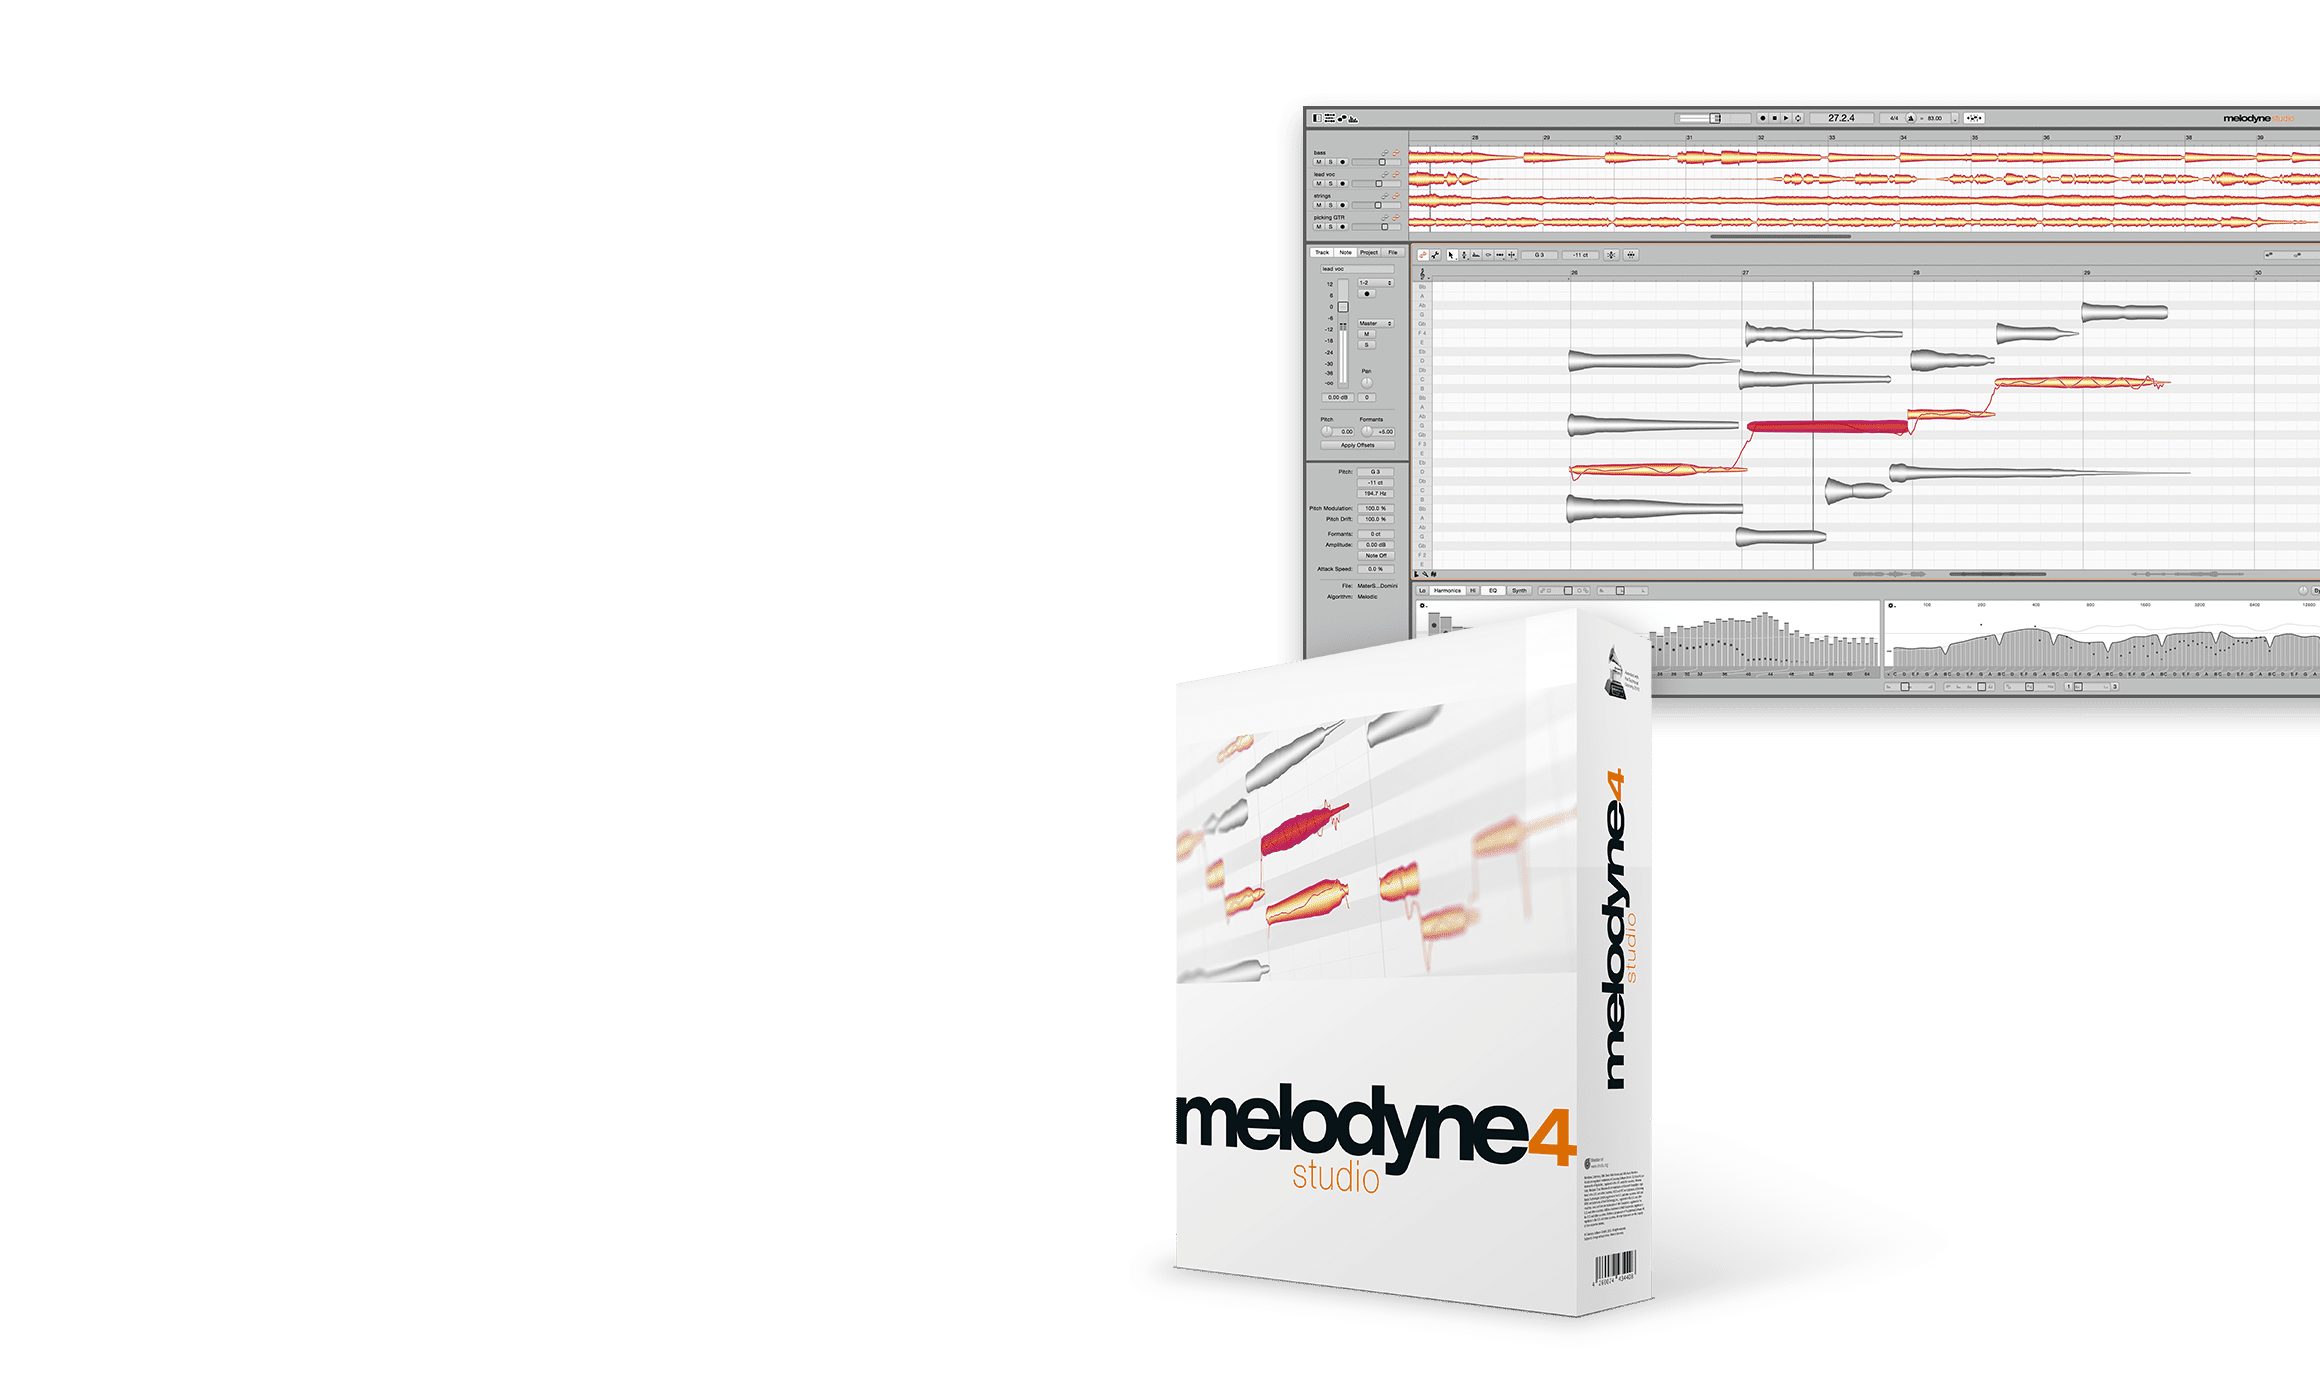 Celemony  launches New Melodyne version 4.2.3 fixes “Expired” problem on start